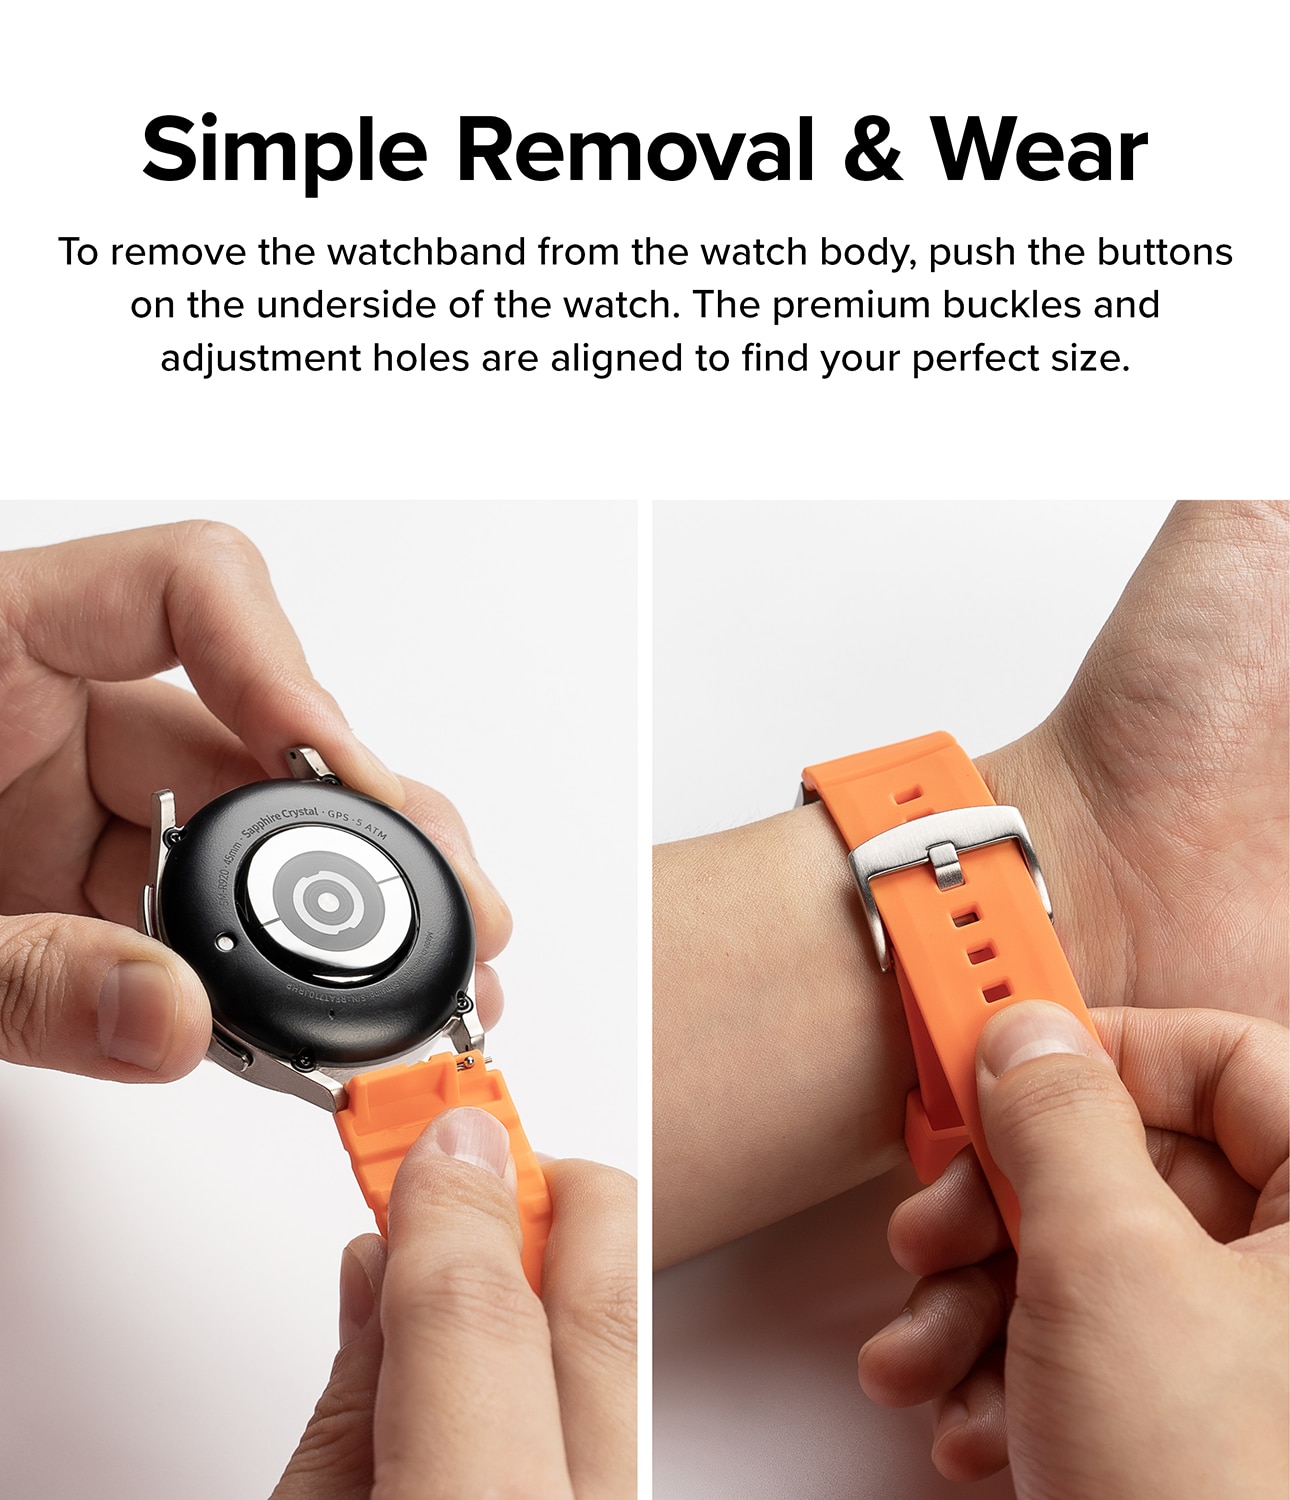 Rubber One Bold Band Withings ScanWatch Nova Orange